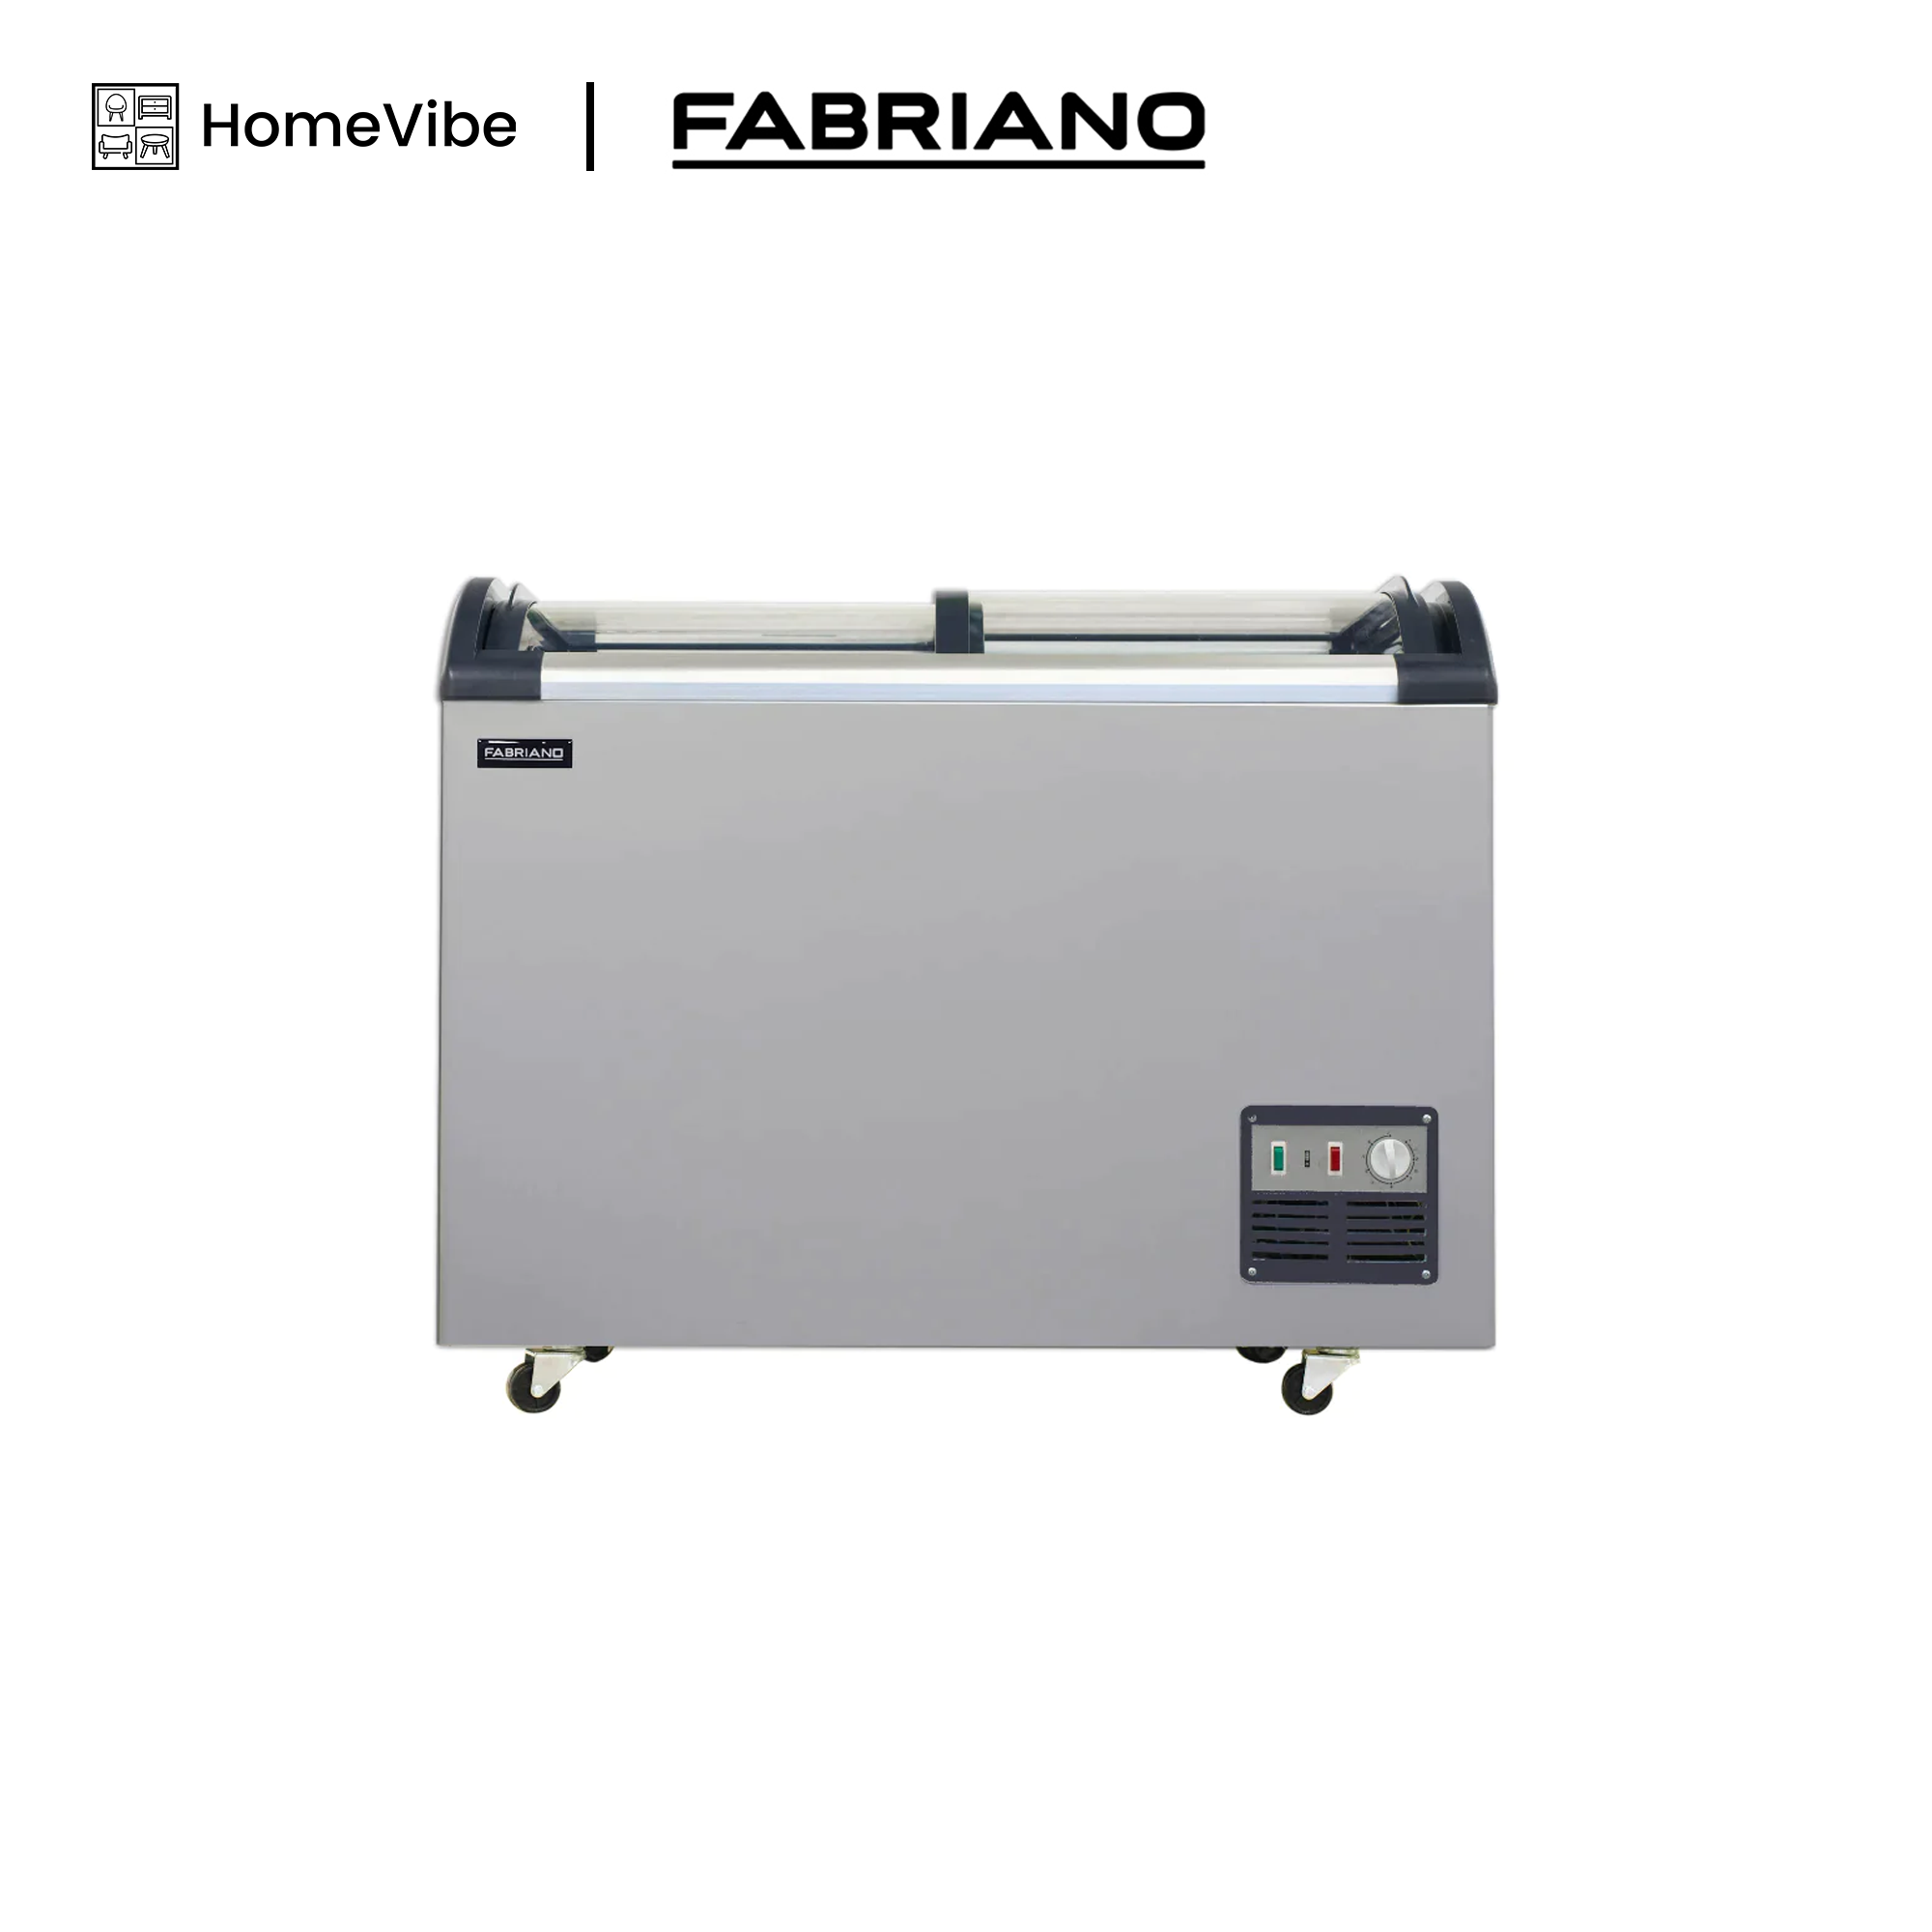 Fabriano 21 cuft Inverter Glass top Dual Function Chest Freezer FGTQ21SG-I